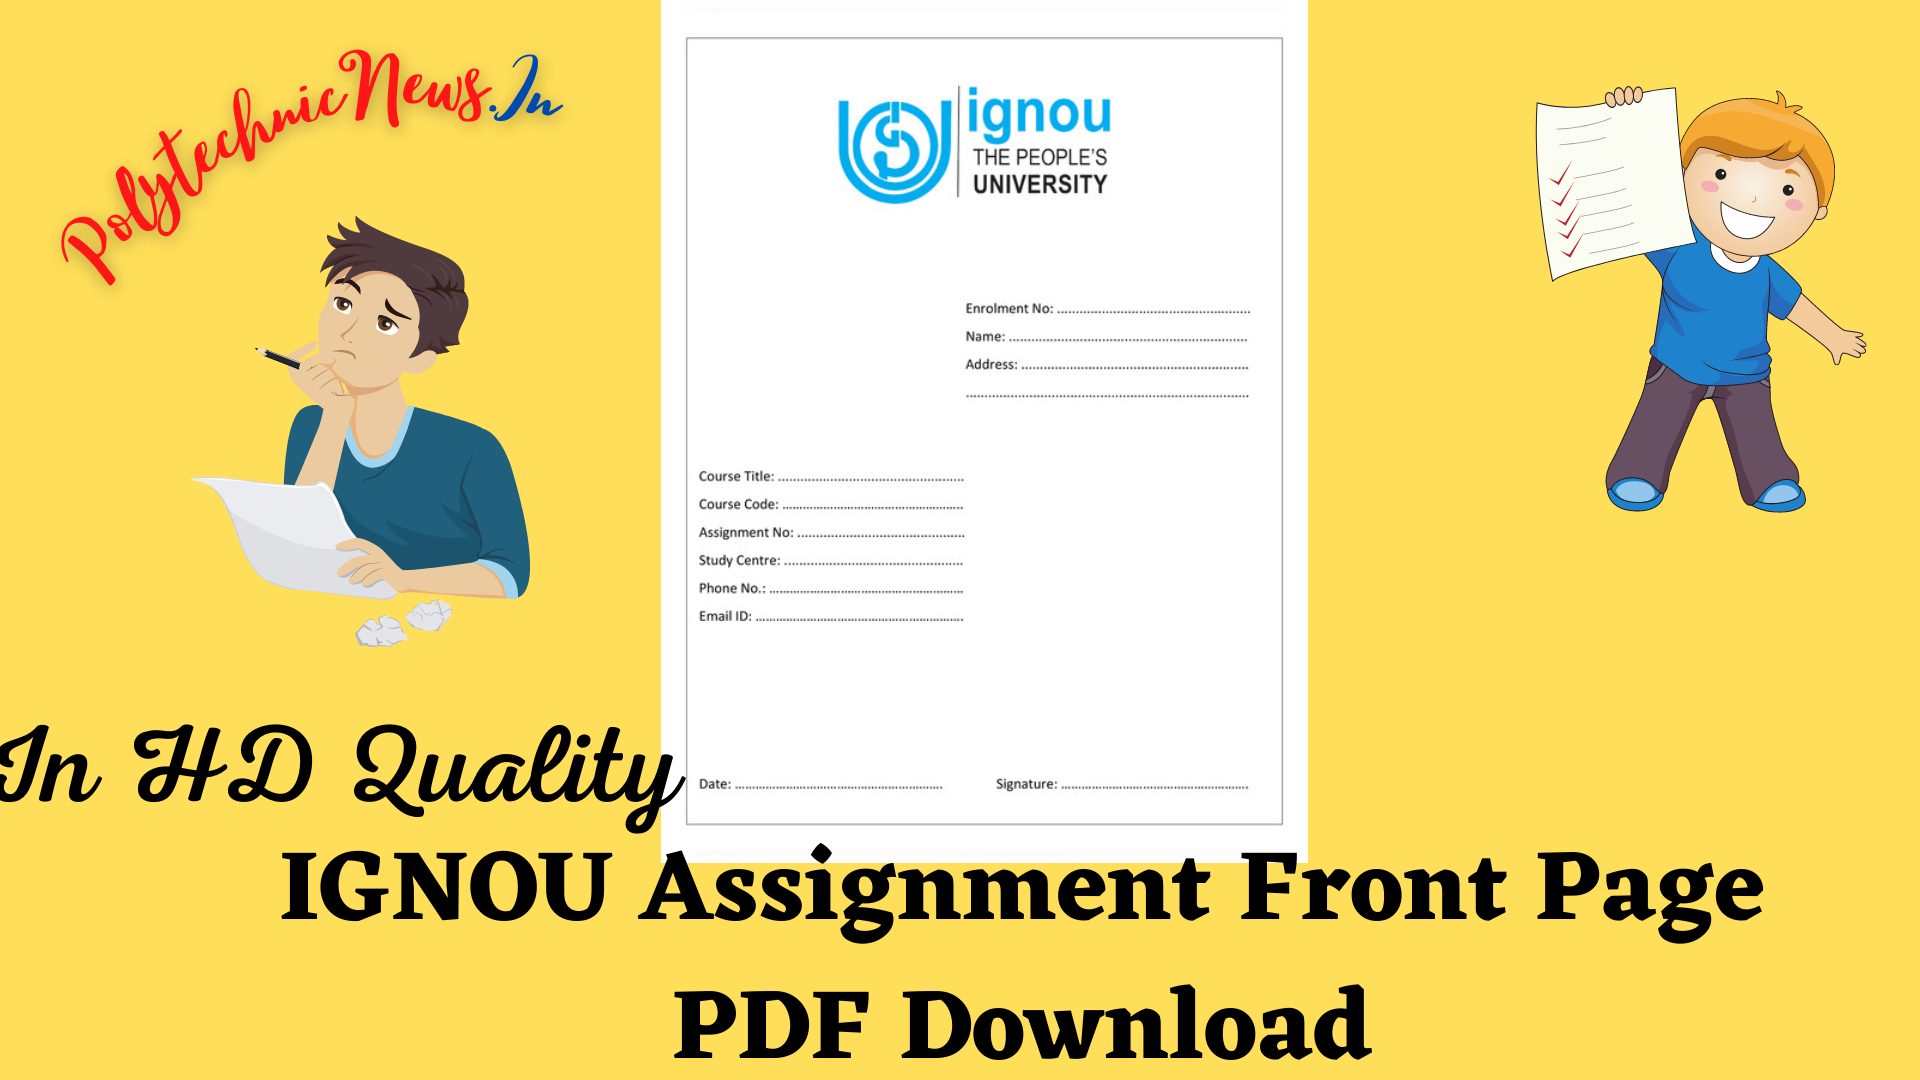 ignou assignment front page download free